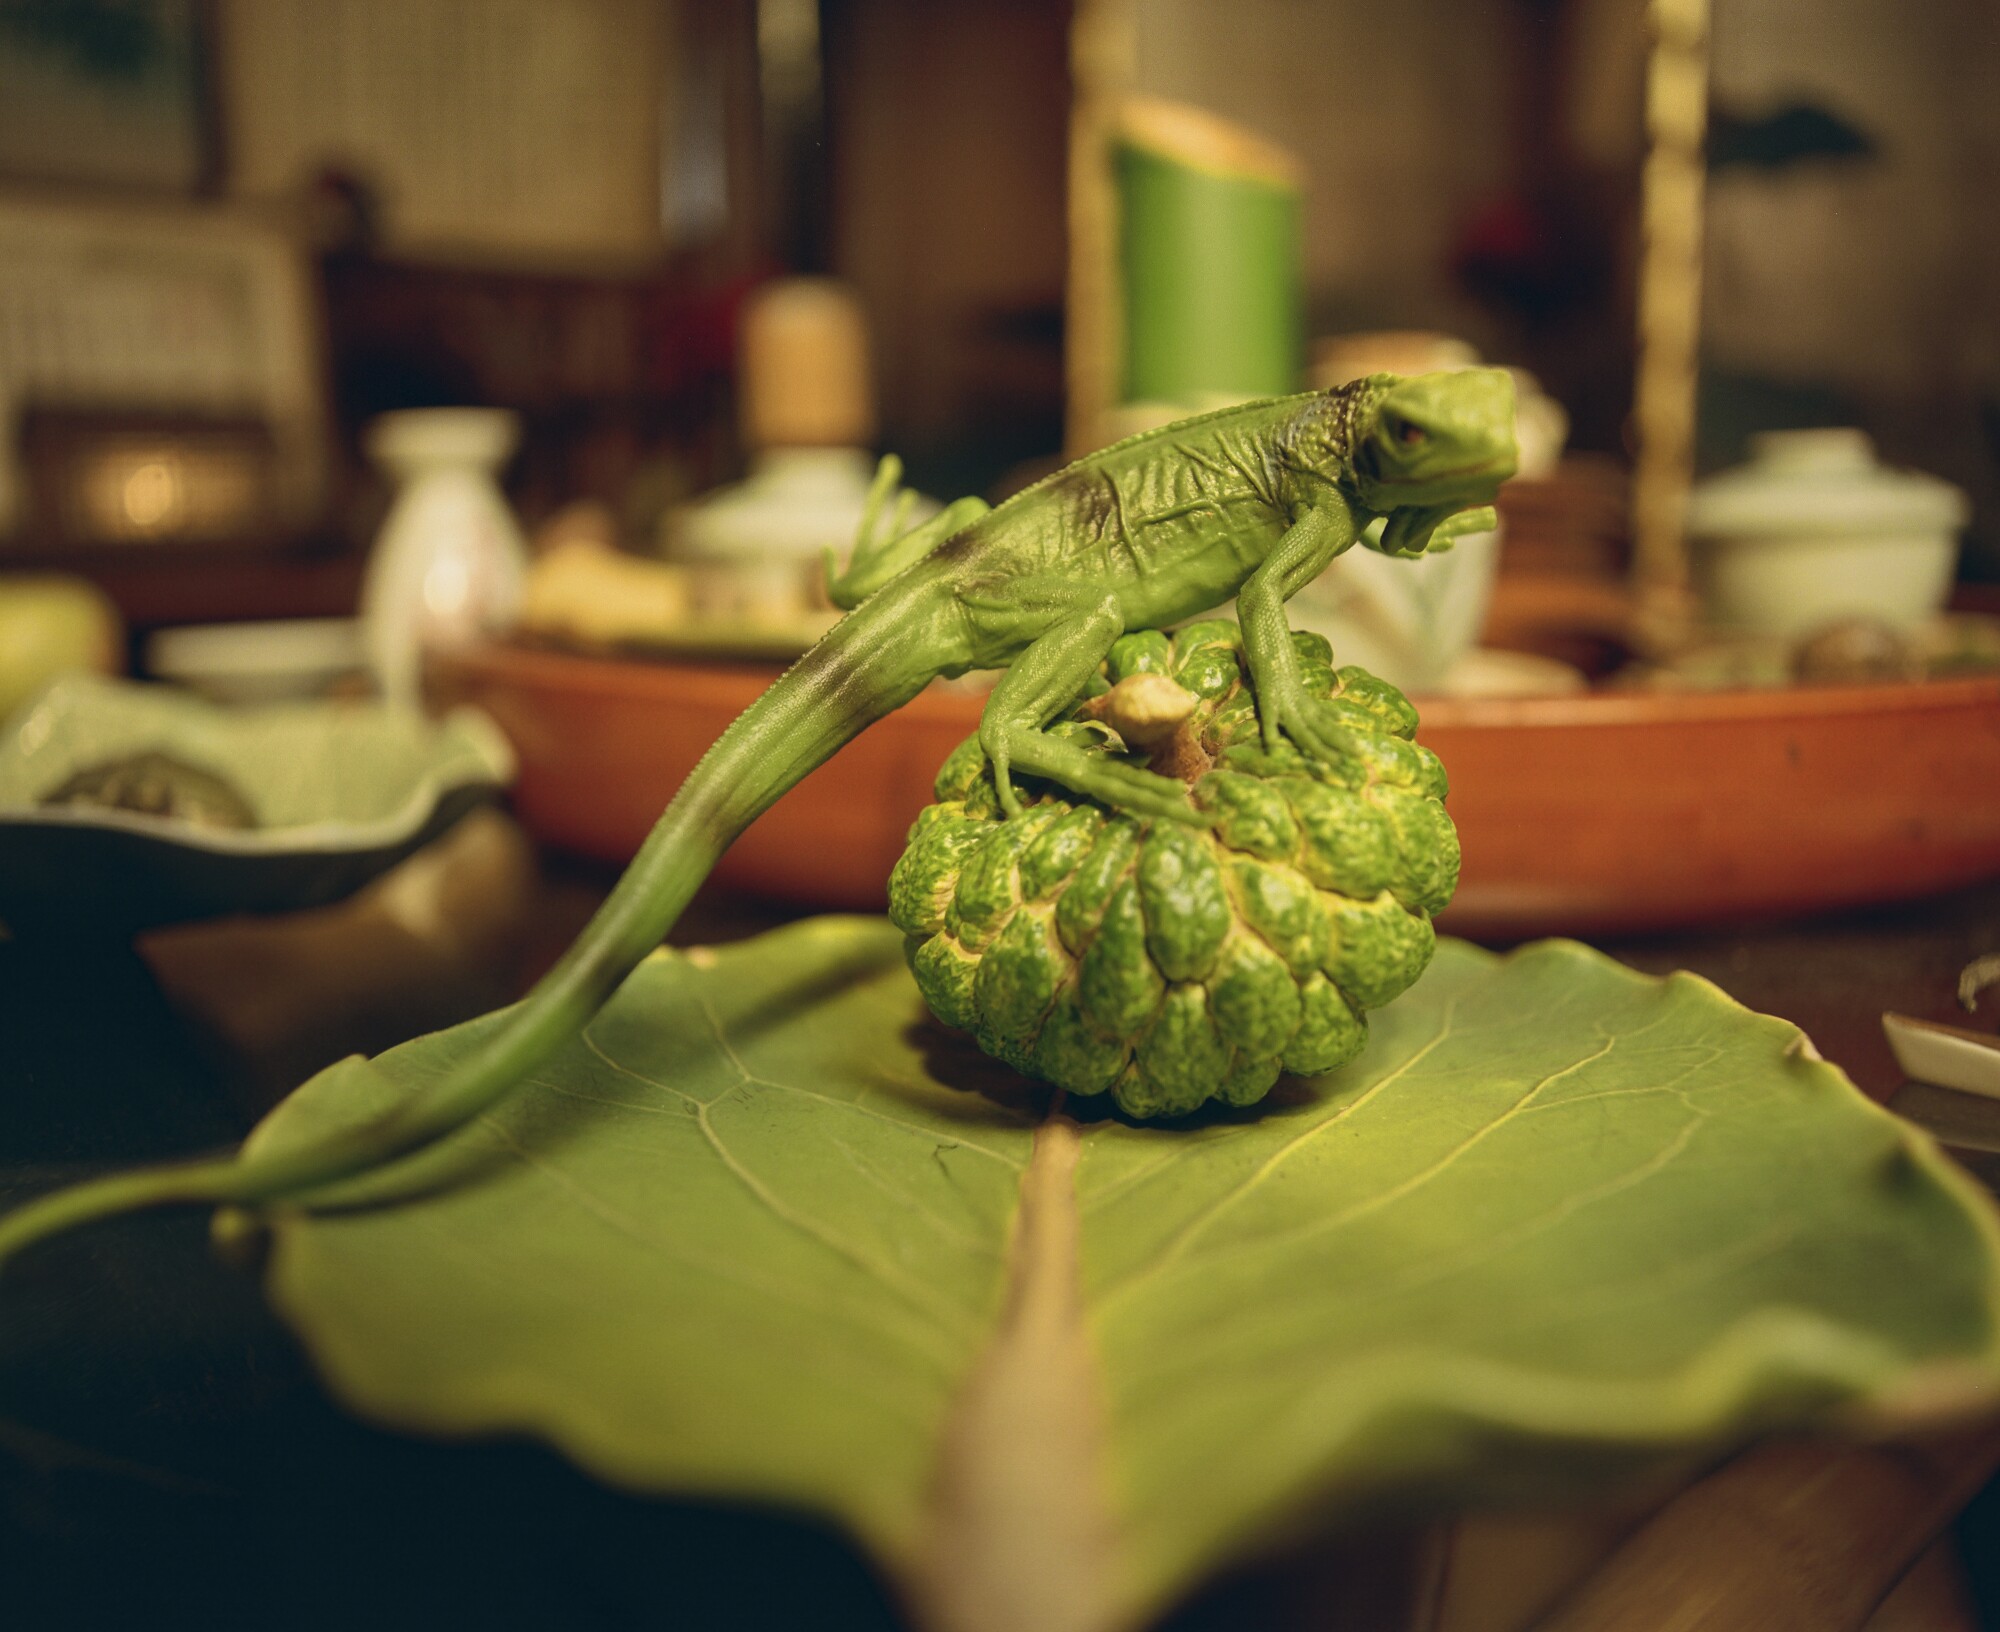 Lai collects lifelike models of food often used by Japanese restaurants.